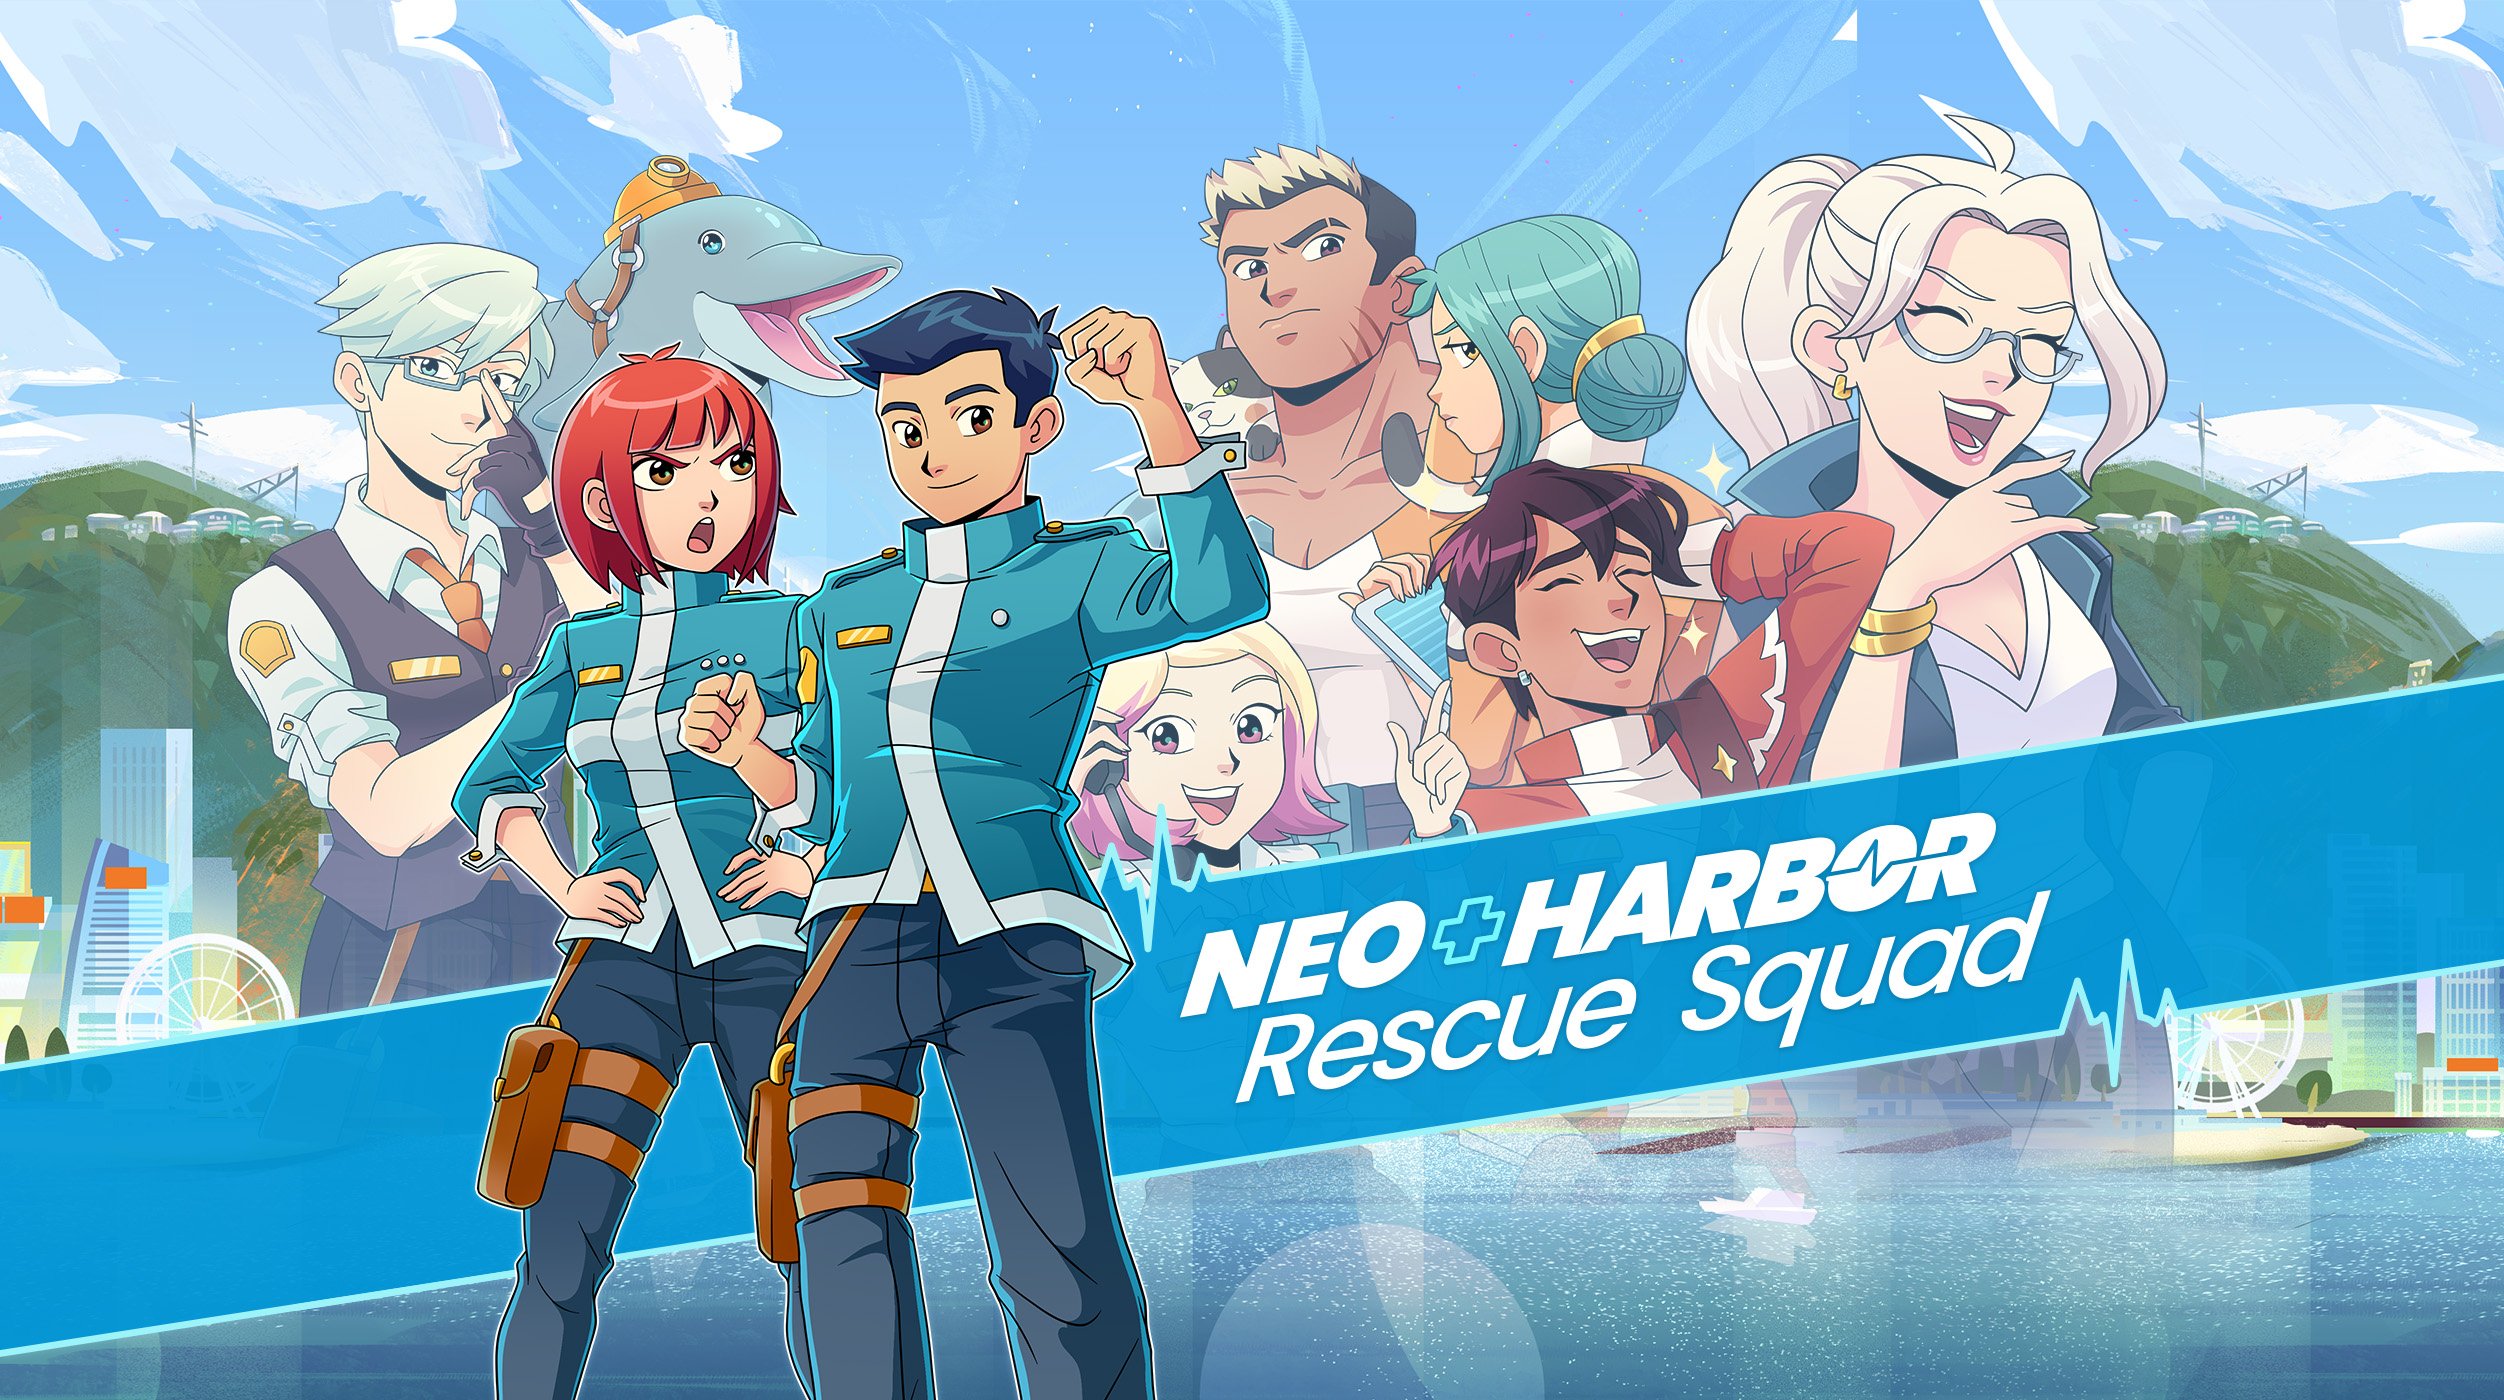 “Medical action drama” Neo Harbor Rescue Squad announced for PS5, PS4 and PC